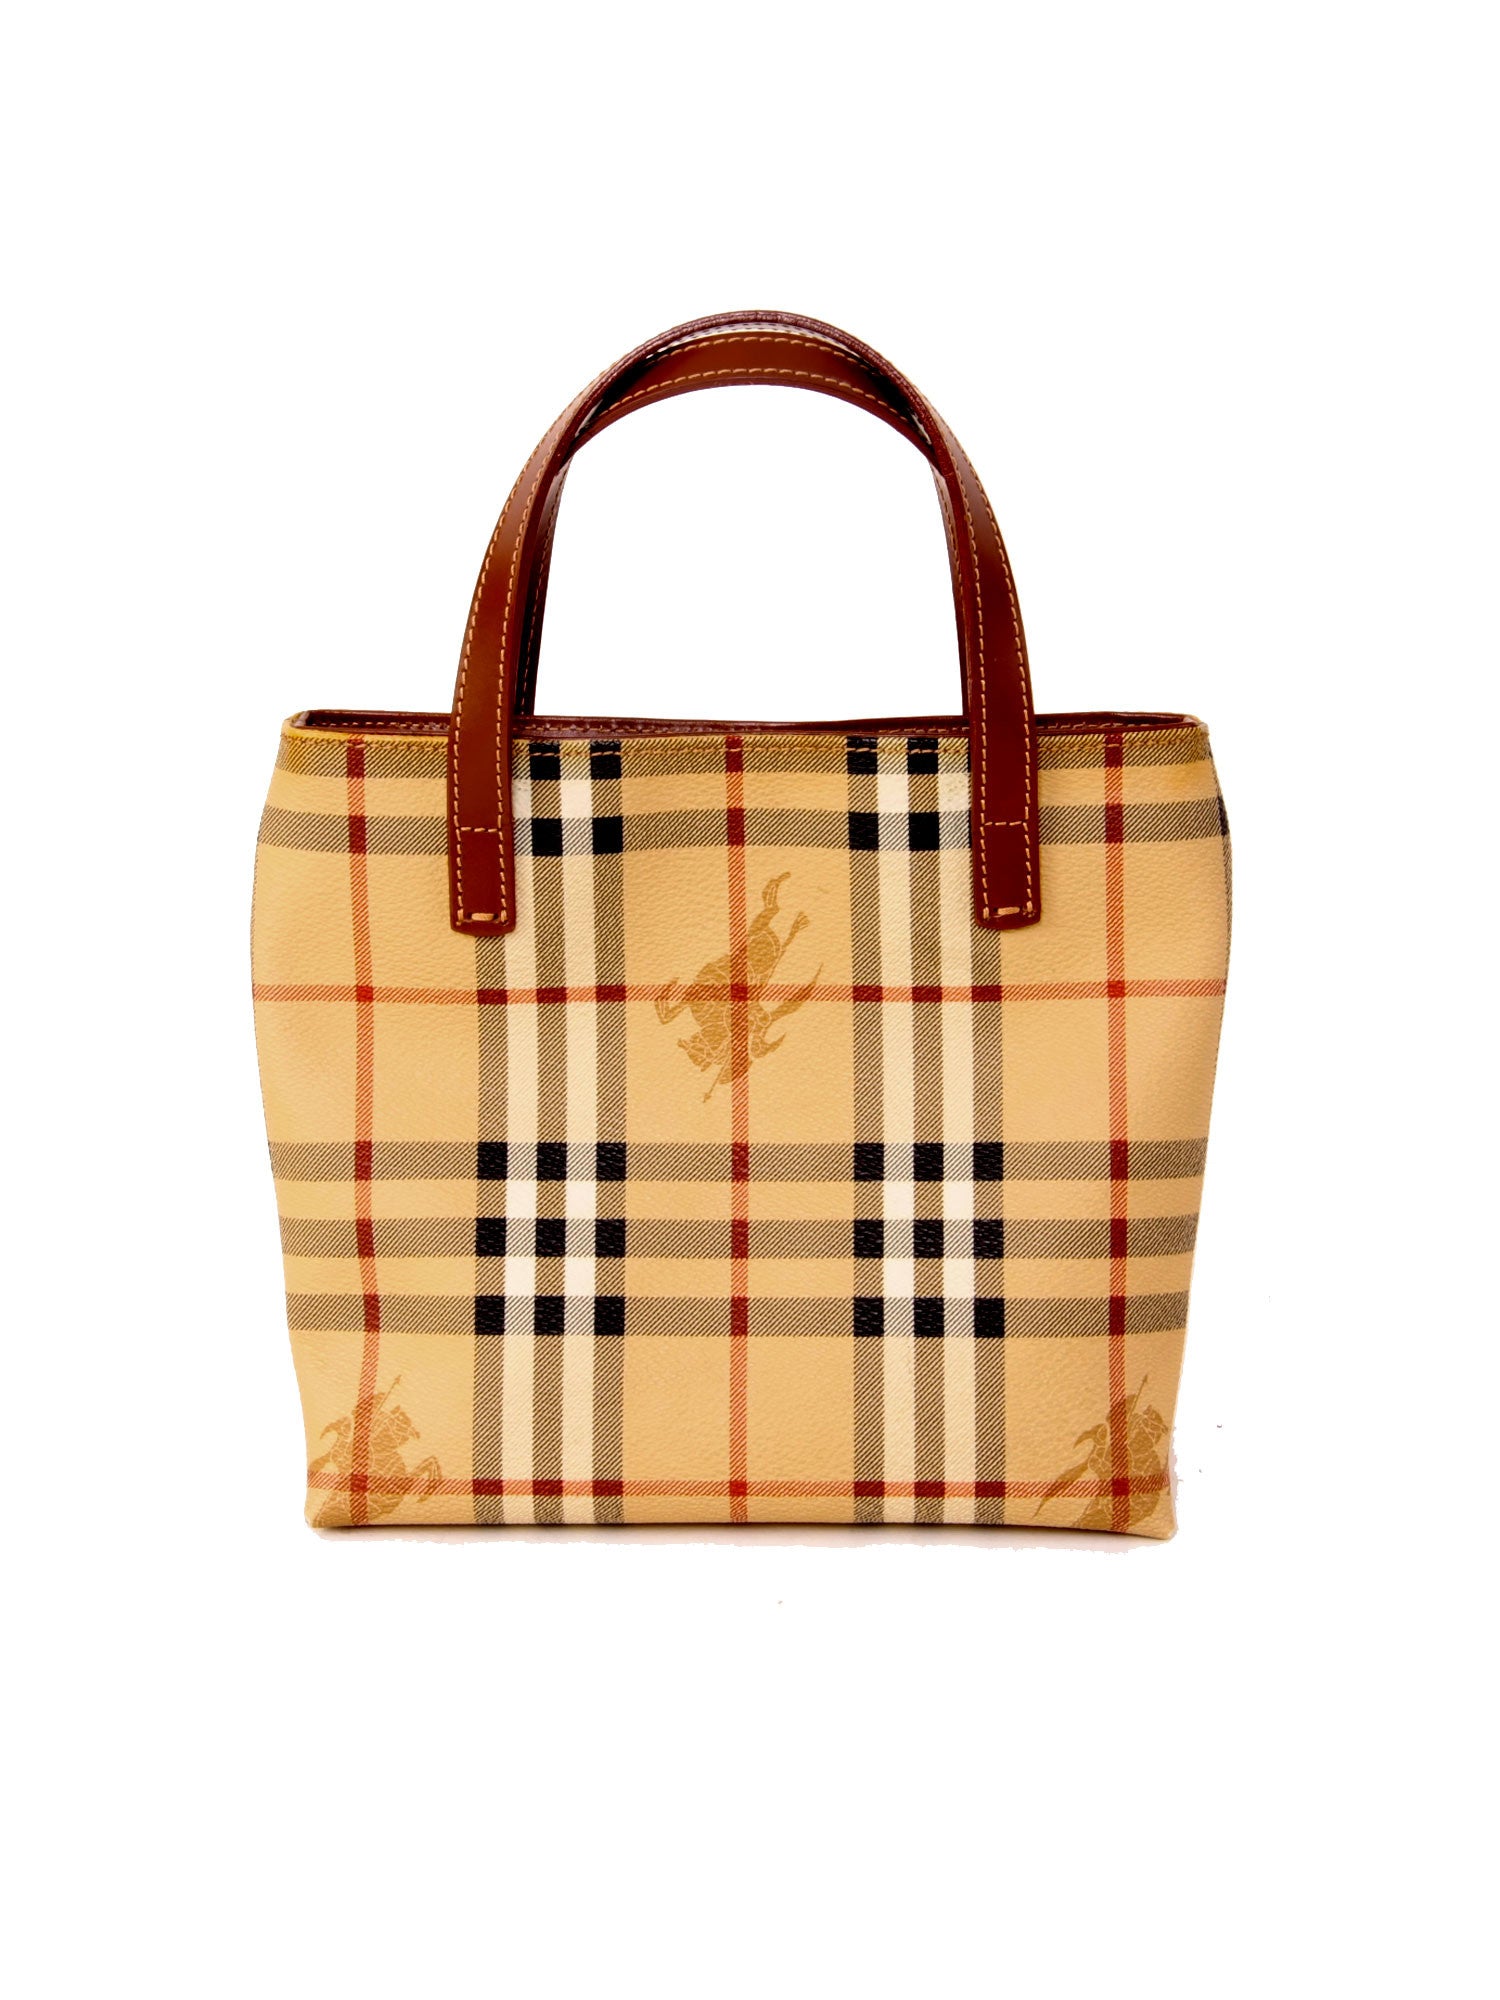 The Burberry Tote Bag Is the Breakout Star of Succession